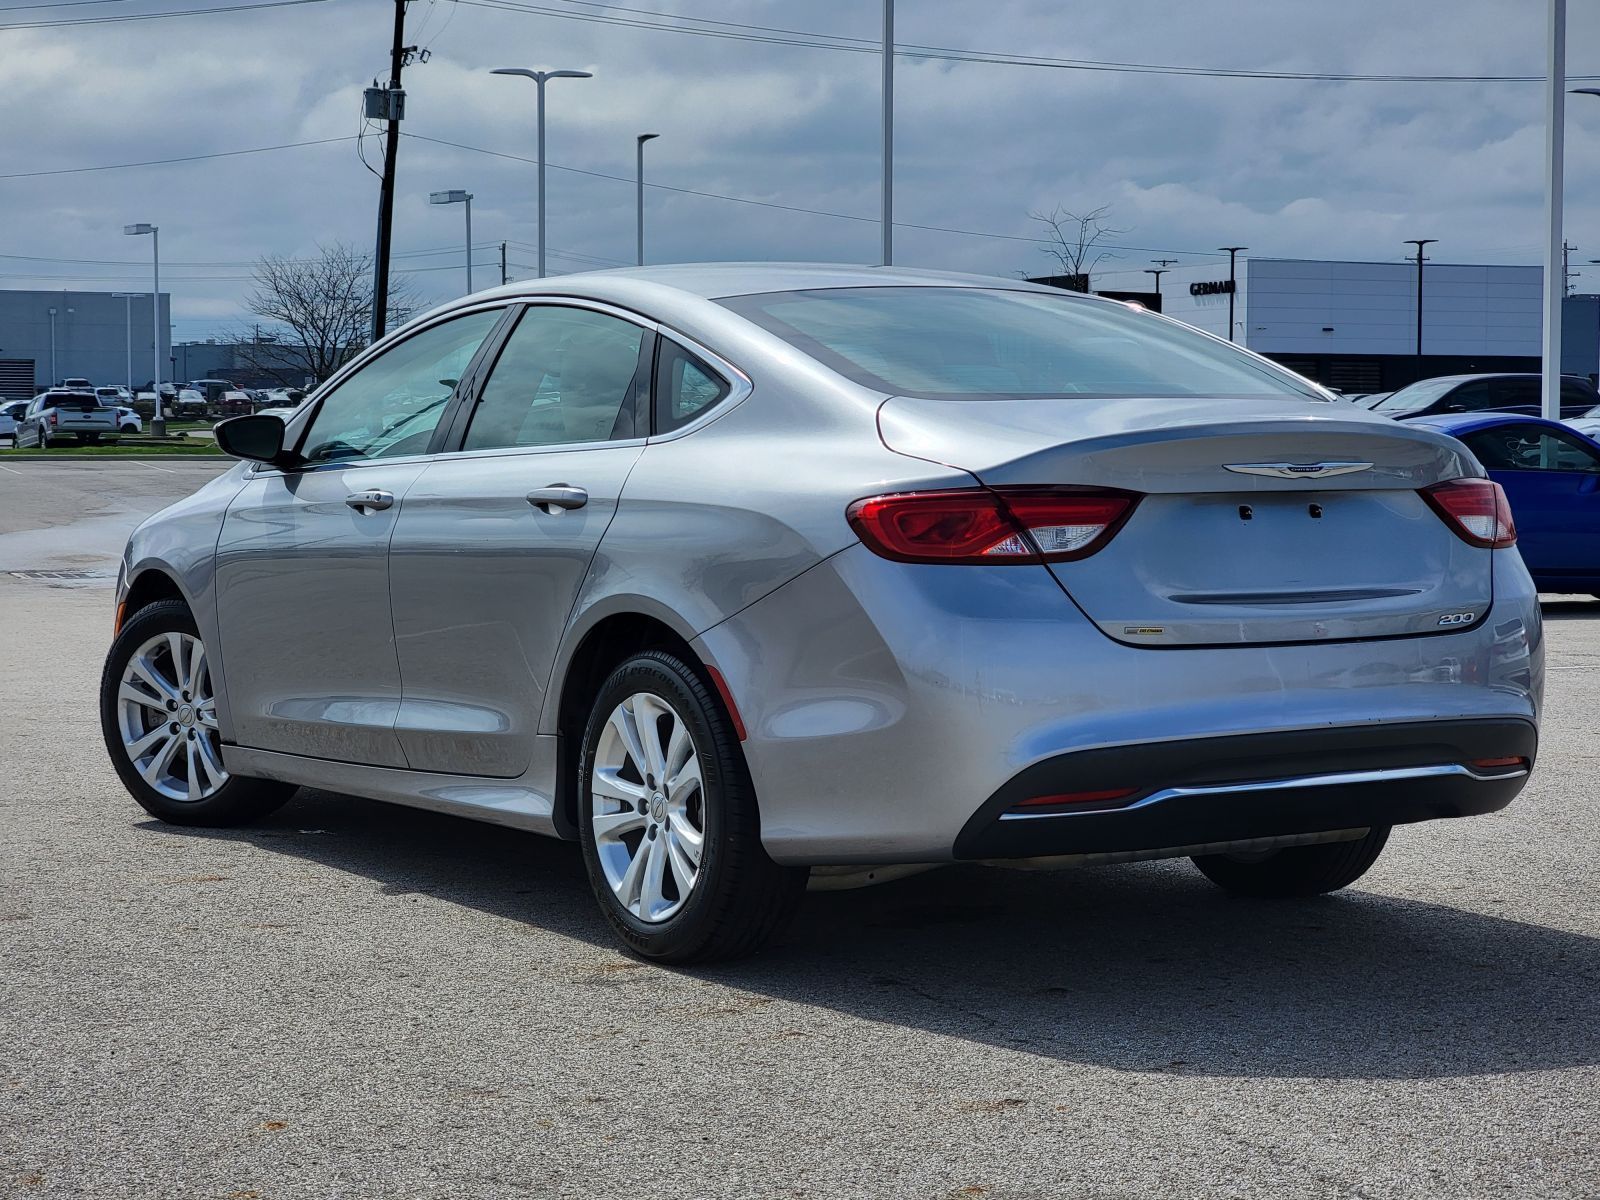 Used, 2015 Chrysler 200 Limited, Silver, P0499-9